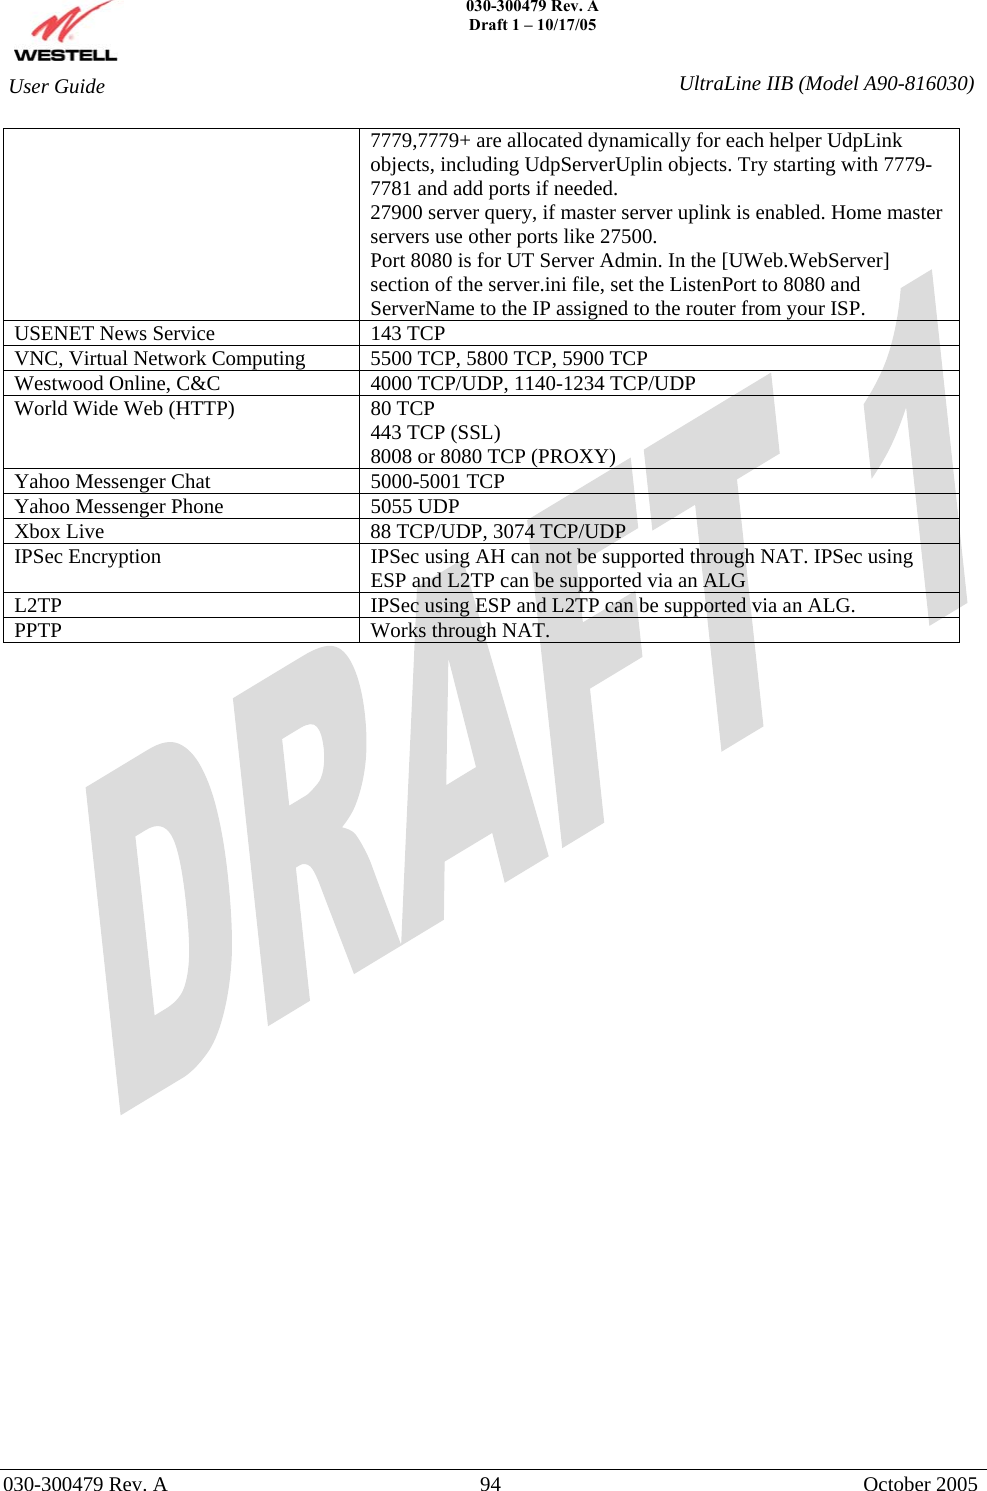    030-300479 Rev. A Draft 1 – 10/17/05   030-300479 Rev. A  94  October 2005  User Guide  UltraLine IIB (Model A90-816030)7779,7779+ are allocated dynamically for each helper UdpLink objects, including UdpServerUplin objects. Try starting with 7779-7781 and add ports if needed. 27900 server query, if master server uplink is enabled. Home master servers use other ports like 27500. Port 8080 is for UT Server Admin. In the [UWeb.WebServer] section of the server.ini file, set the ListenPort to 8080 and ServerName to the IP assigned to the router from your ISP. USENET News Service  143 TCP VNC, Virtual Network Computing  5500 TCP, 5800 TCP, 5900 TCP Westwood Online, C&amp;C  4000 TCP/UDP, 1140-1234 TCP/UDP World Wide Web (HTTP)  80 TCP 443 TCP (SSL) 8008 or 8080 TCP (PROXY) Yahoo Messenger Chat  5000-5001 TCP Yahoo Messenger Phone  5055 UDP Xbox Live  88 TCP/UDP, 3074 TCP/UDP IPSec Encryption  IPSec using AH can not be supported through NAT. IPSec using ESP and L2TP can be supported via an ALG L2TP  IPSec using ESP and L2TP can be supported via an ALG. PPTP  Works through NAT.      